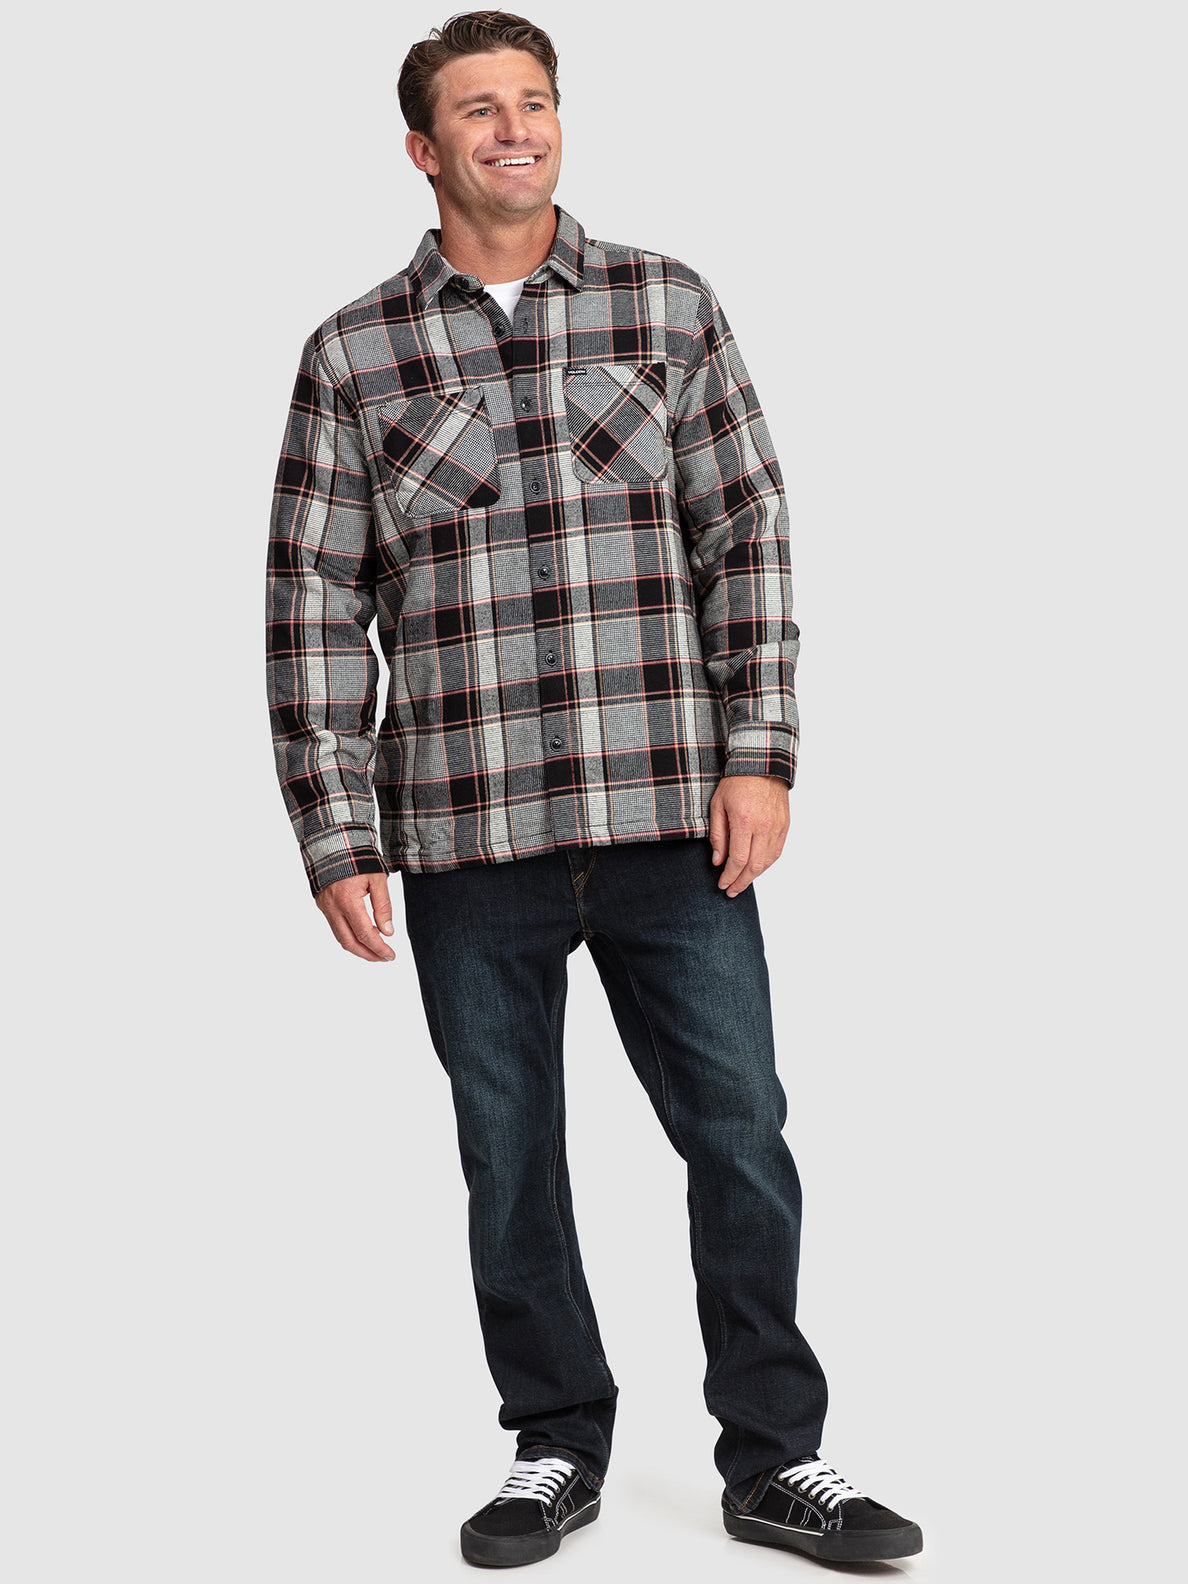 Brickstone Lined Flannel Long Sleeve Shirt - Dirty White (A0532300_DWH) [4]